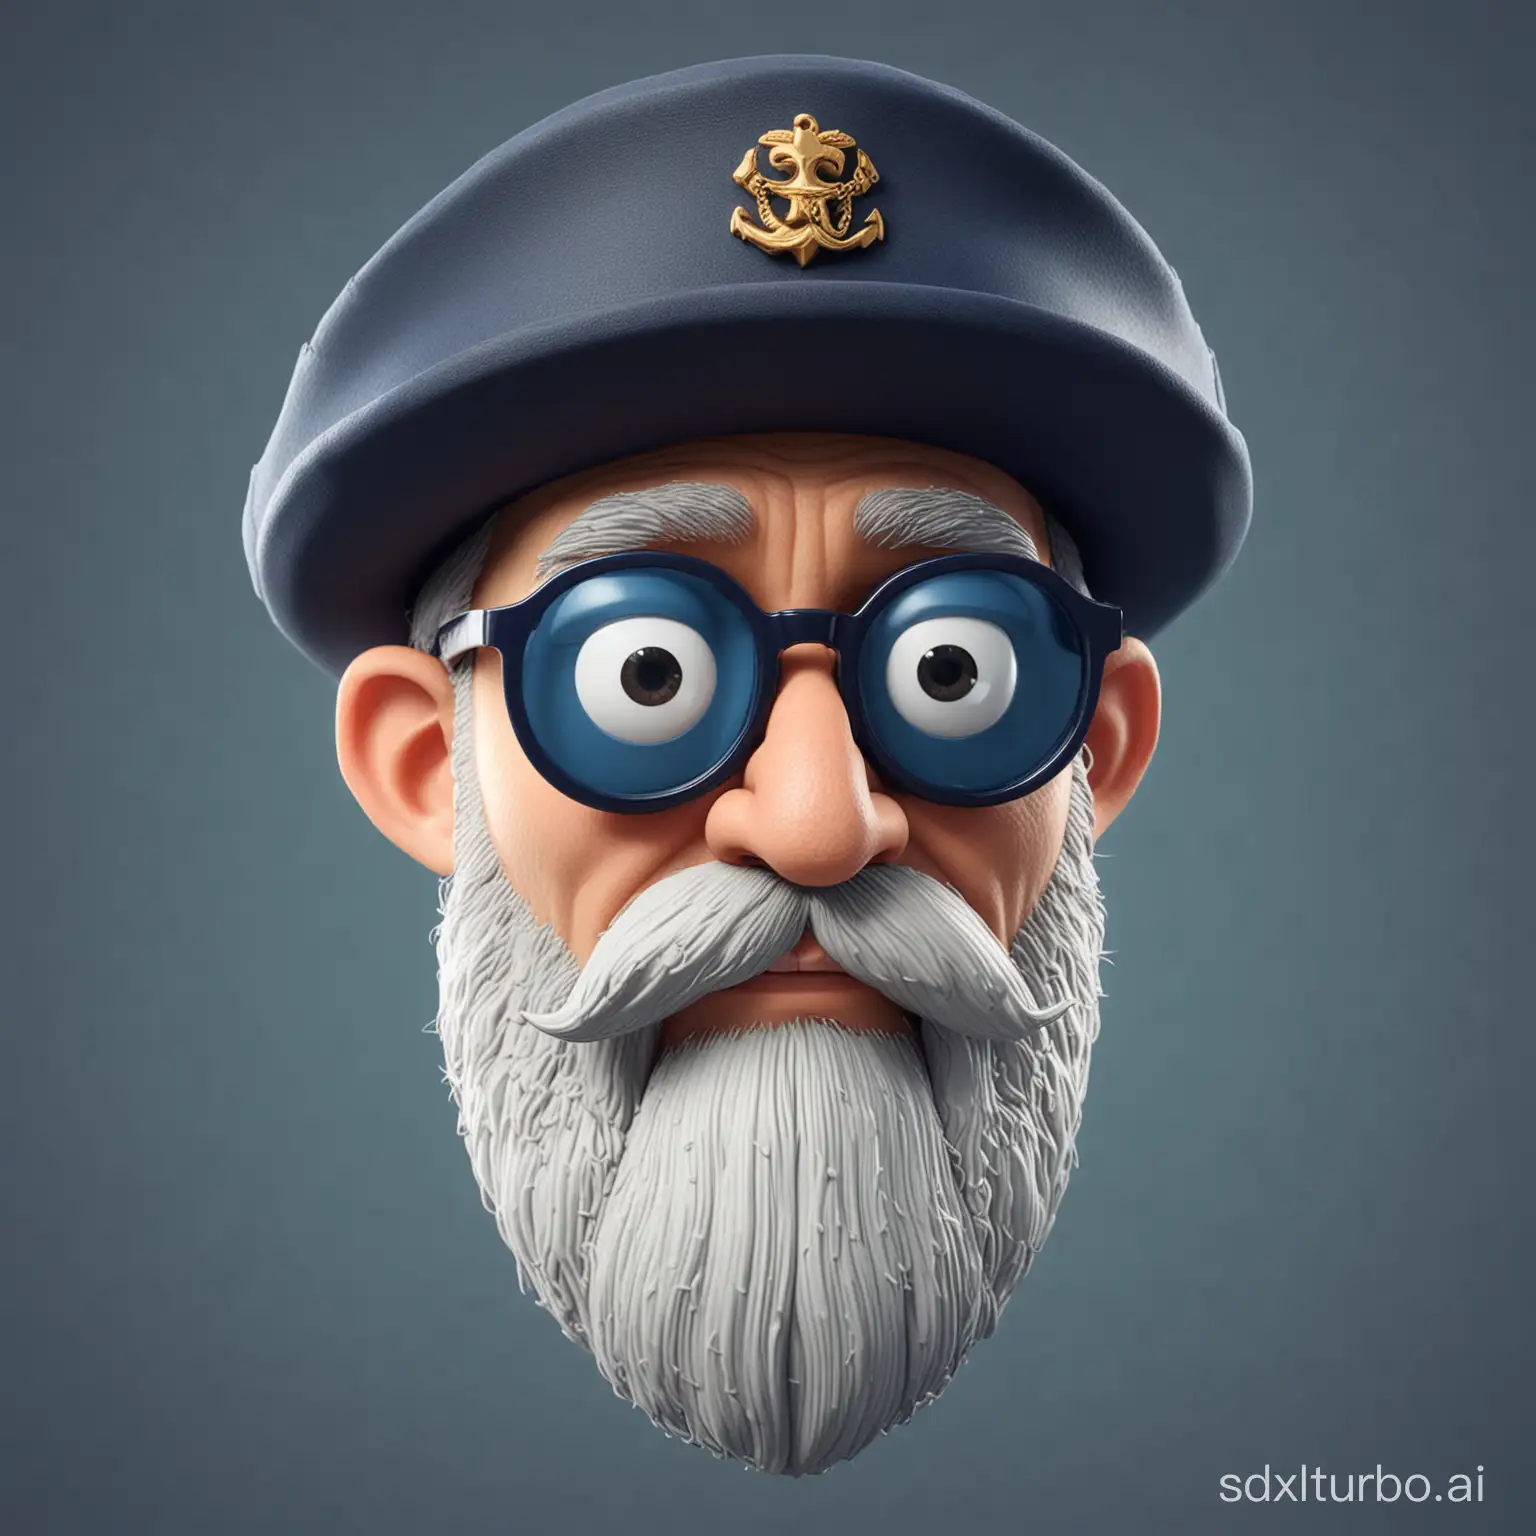 a cartoonish 3d head model of a man with somewhat long beard and a navy hat and round soundglasses